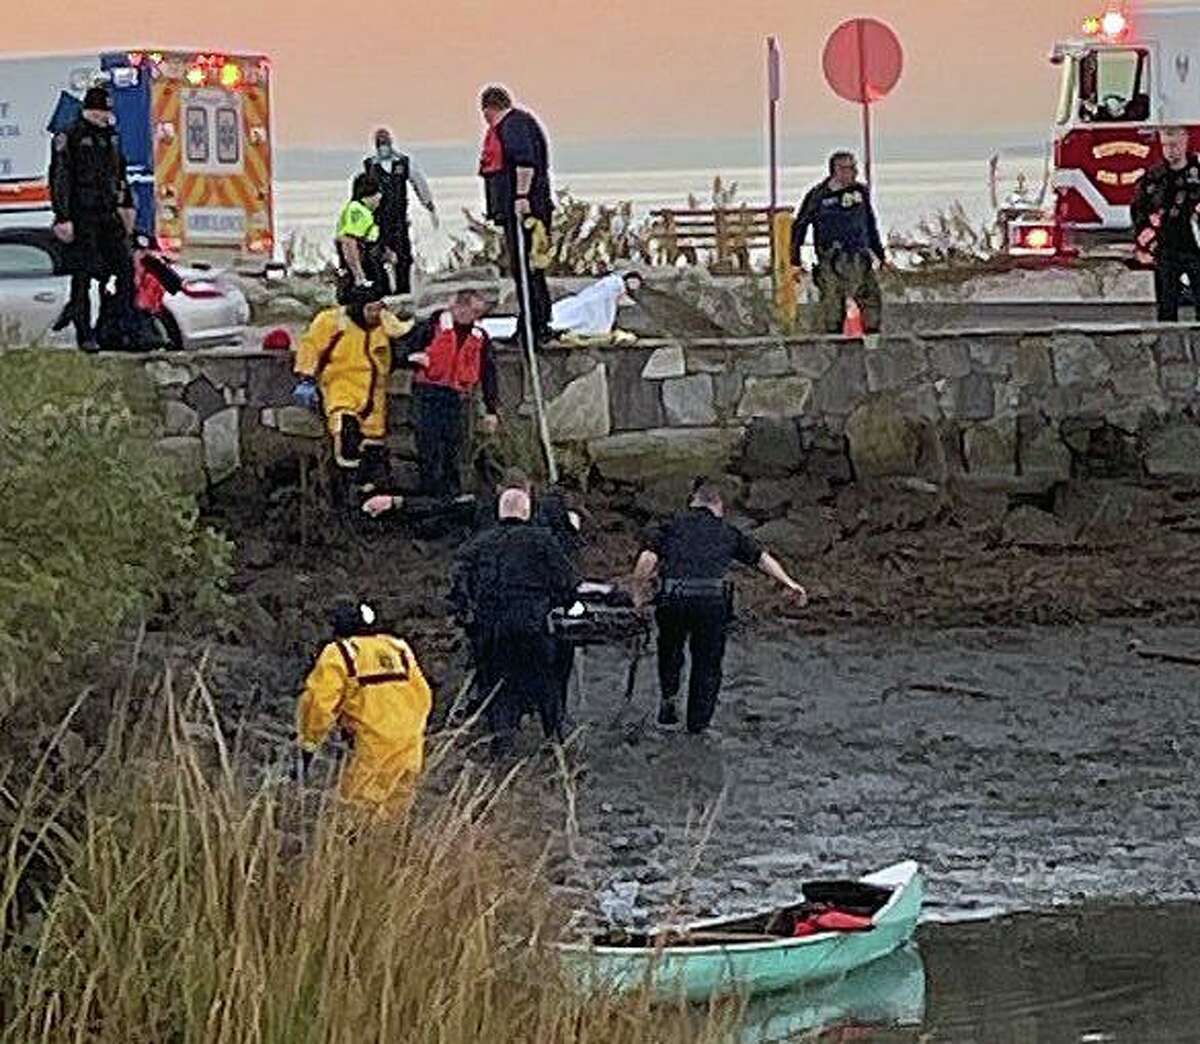 Just before 6 a.m. Tuesday, Nov. 9, 2021, police responded to the Saugatuck Shores in Westport, Conn., on a report of a missing elderly man, Lt. David Wolf said. Several officers began searching the area and soon found the missing man, partially submerged in the water.